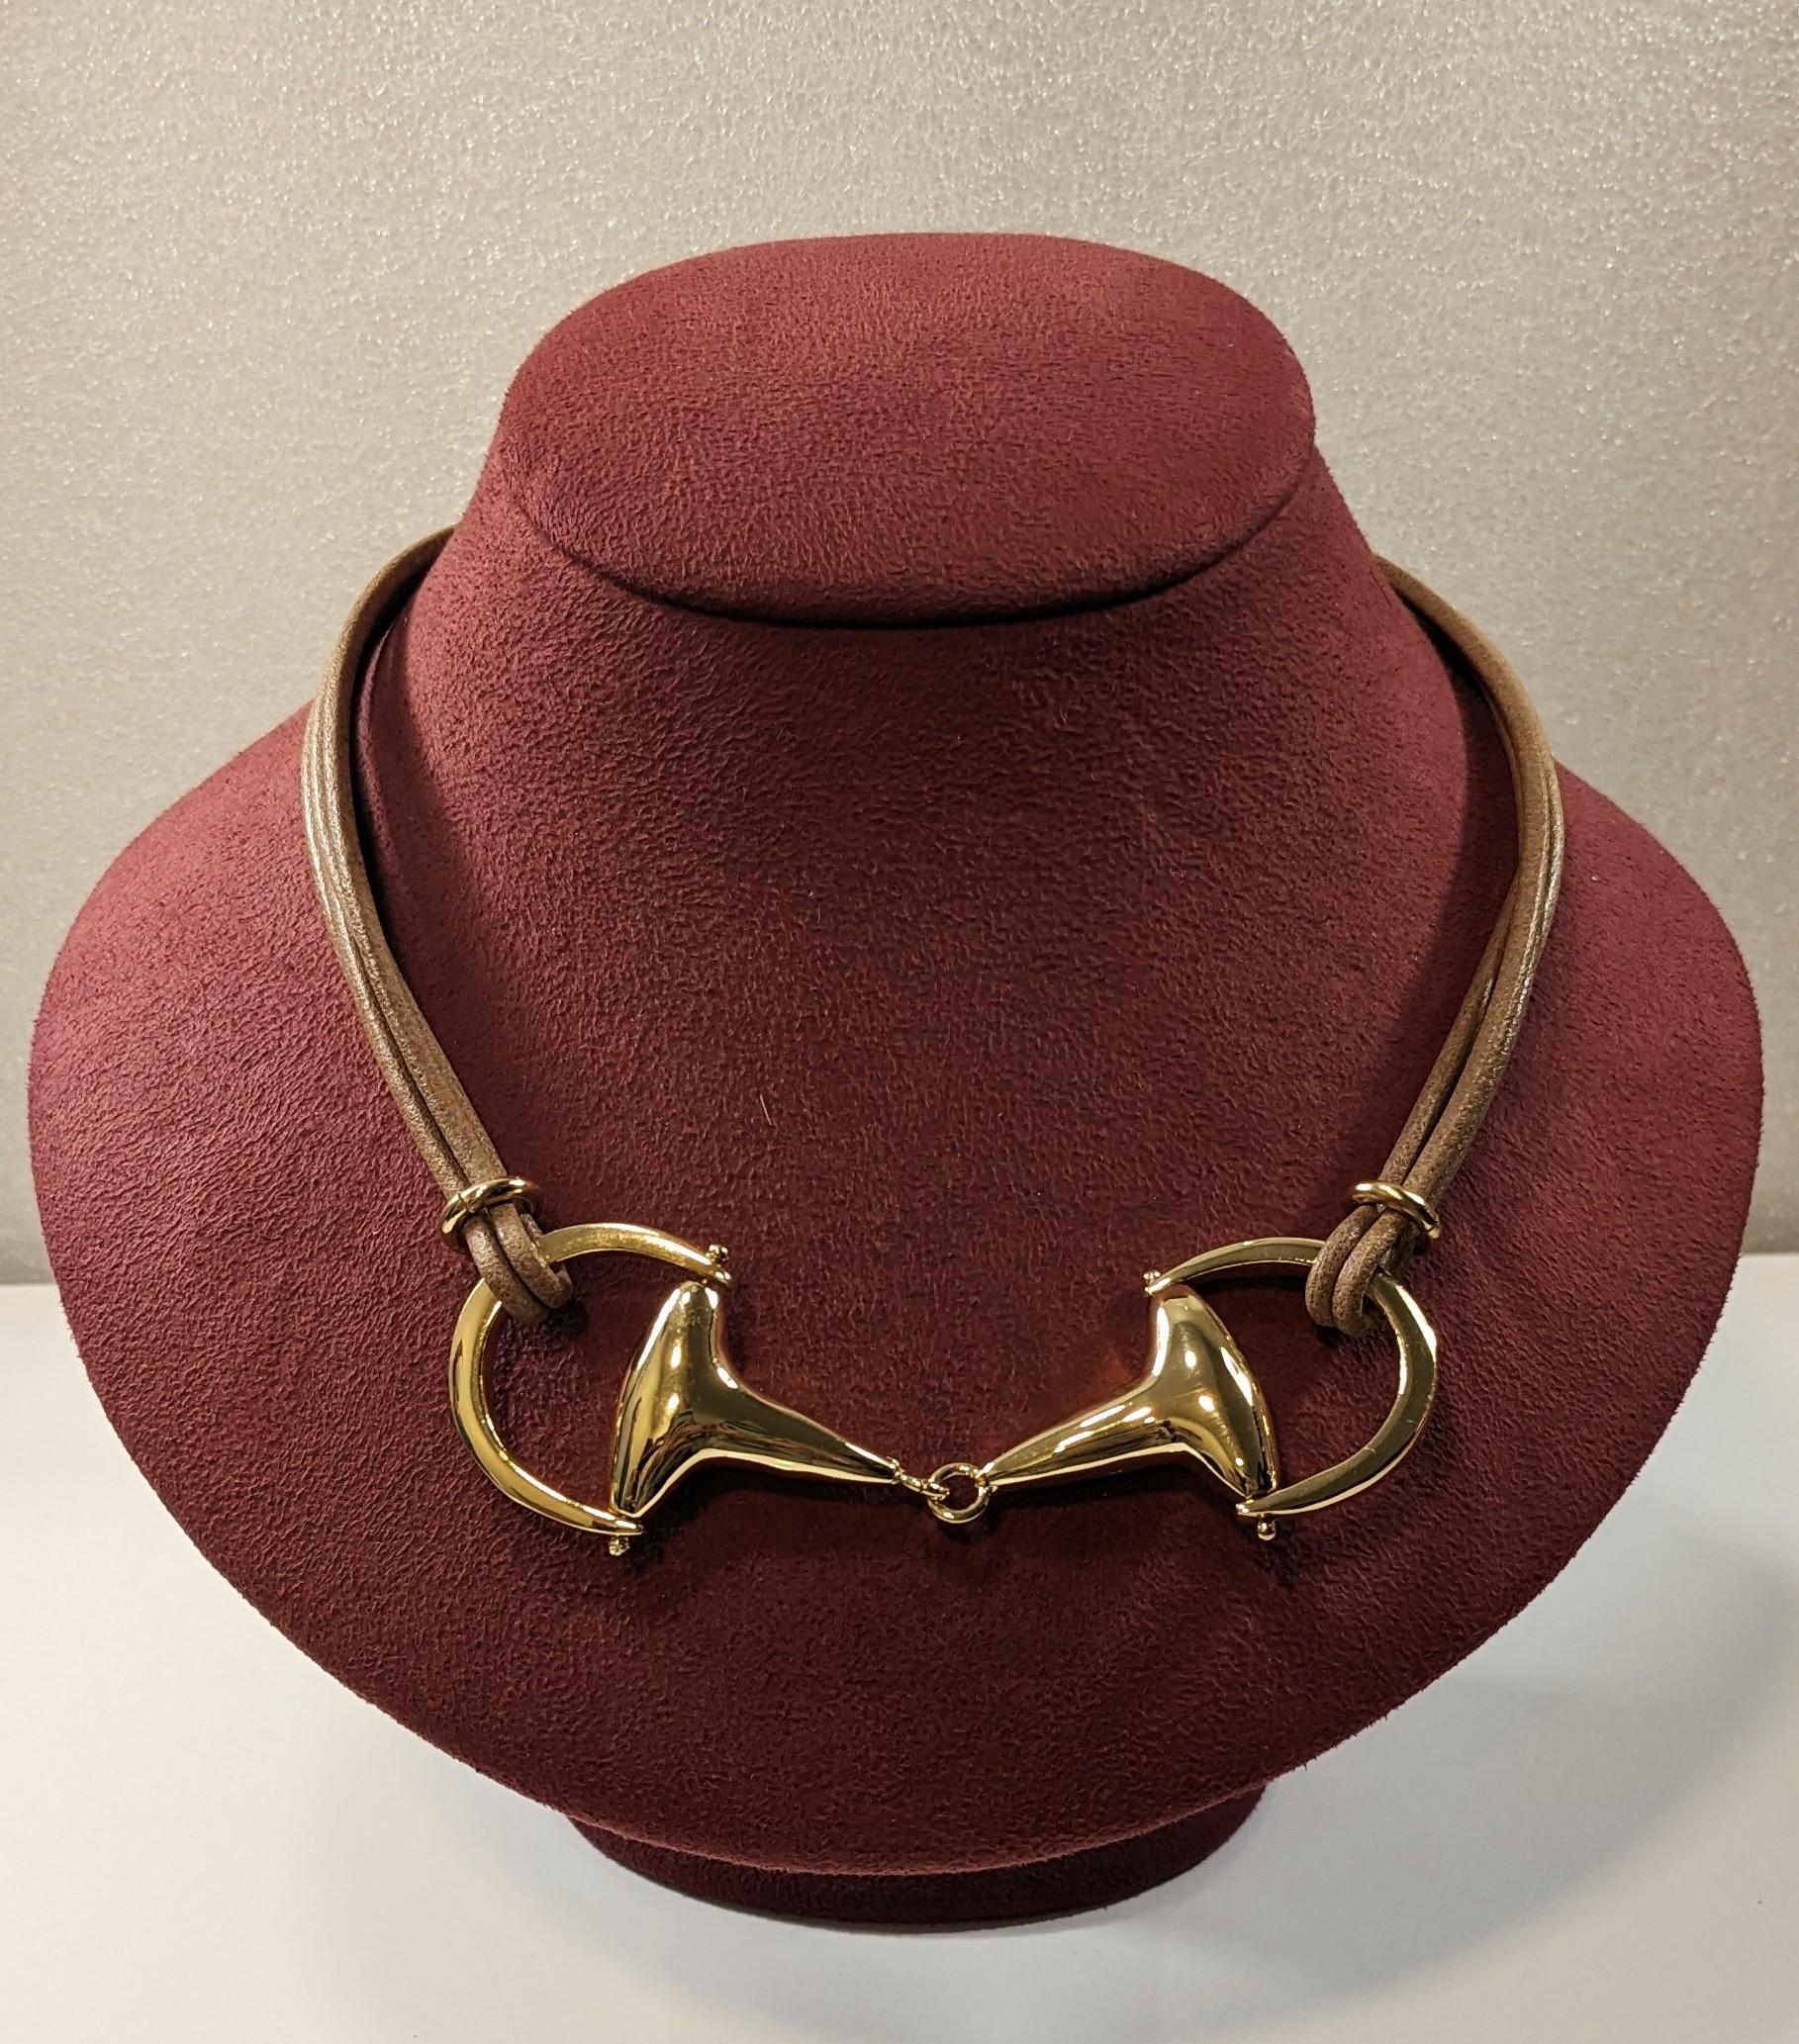 Necklace with gold-plated central stirrup and choker with four brown leather strips by Regina Cora
Dimensions  46cm
Rear chain length  5 cm


READY TO SHIP
*Shipment of this piece is not affected by COVID-19. Orders welcome!*
Musuła comes from the